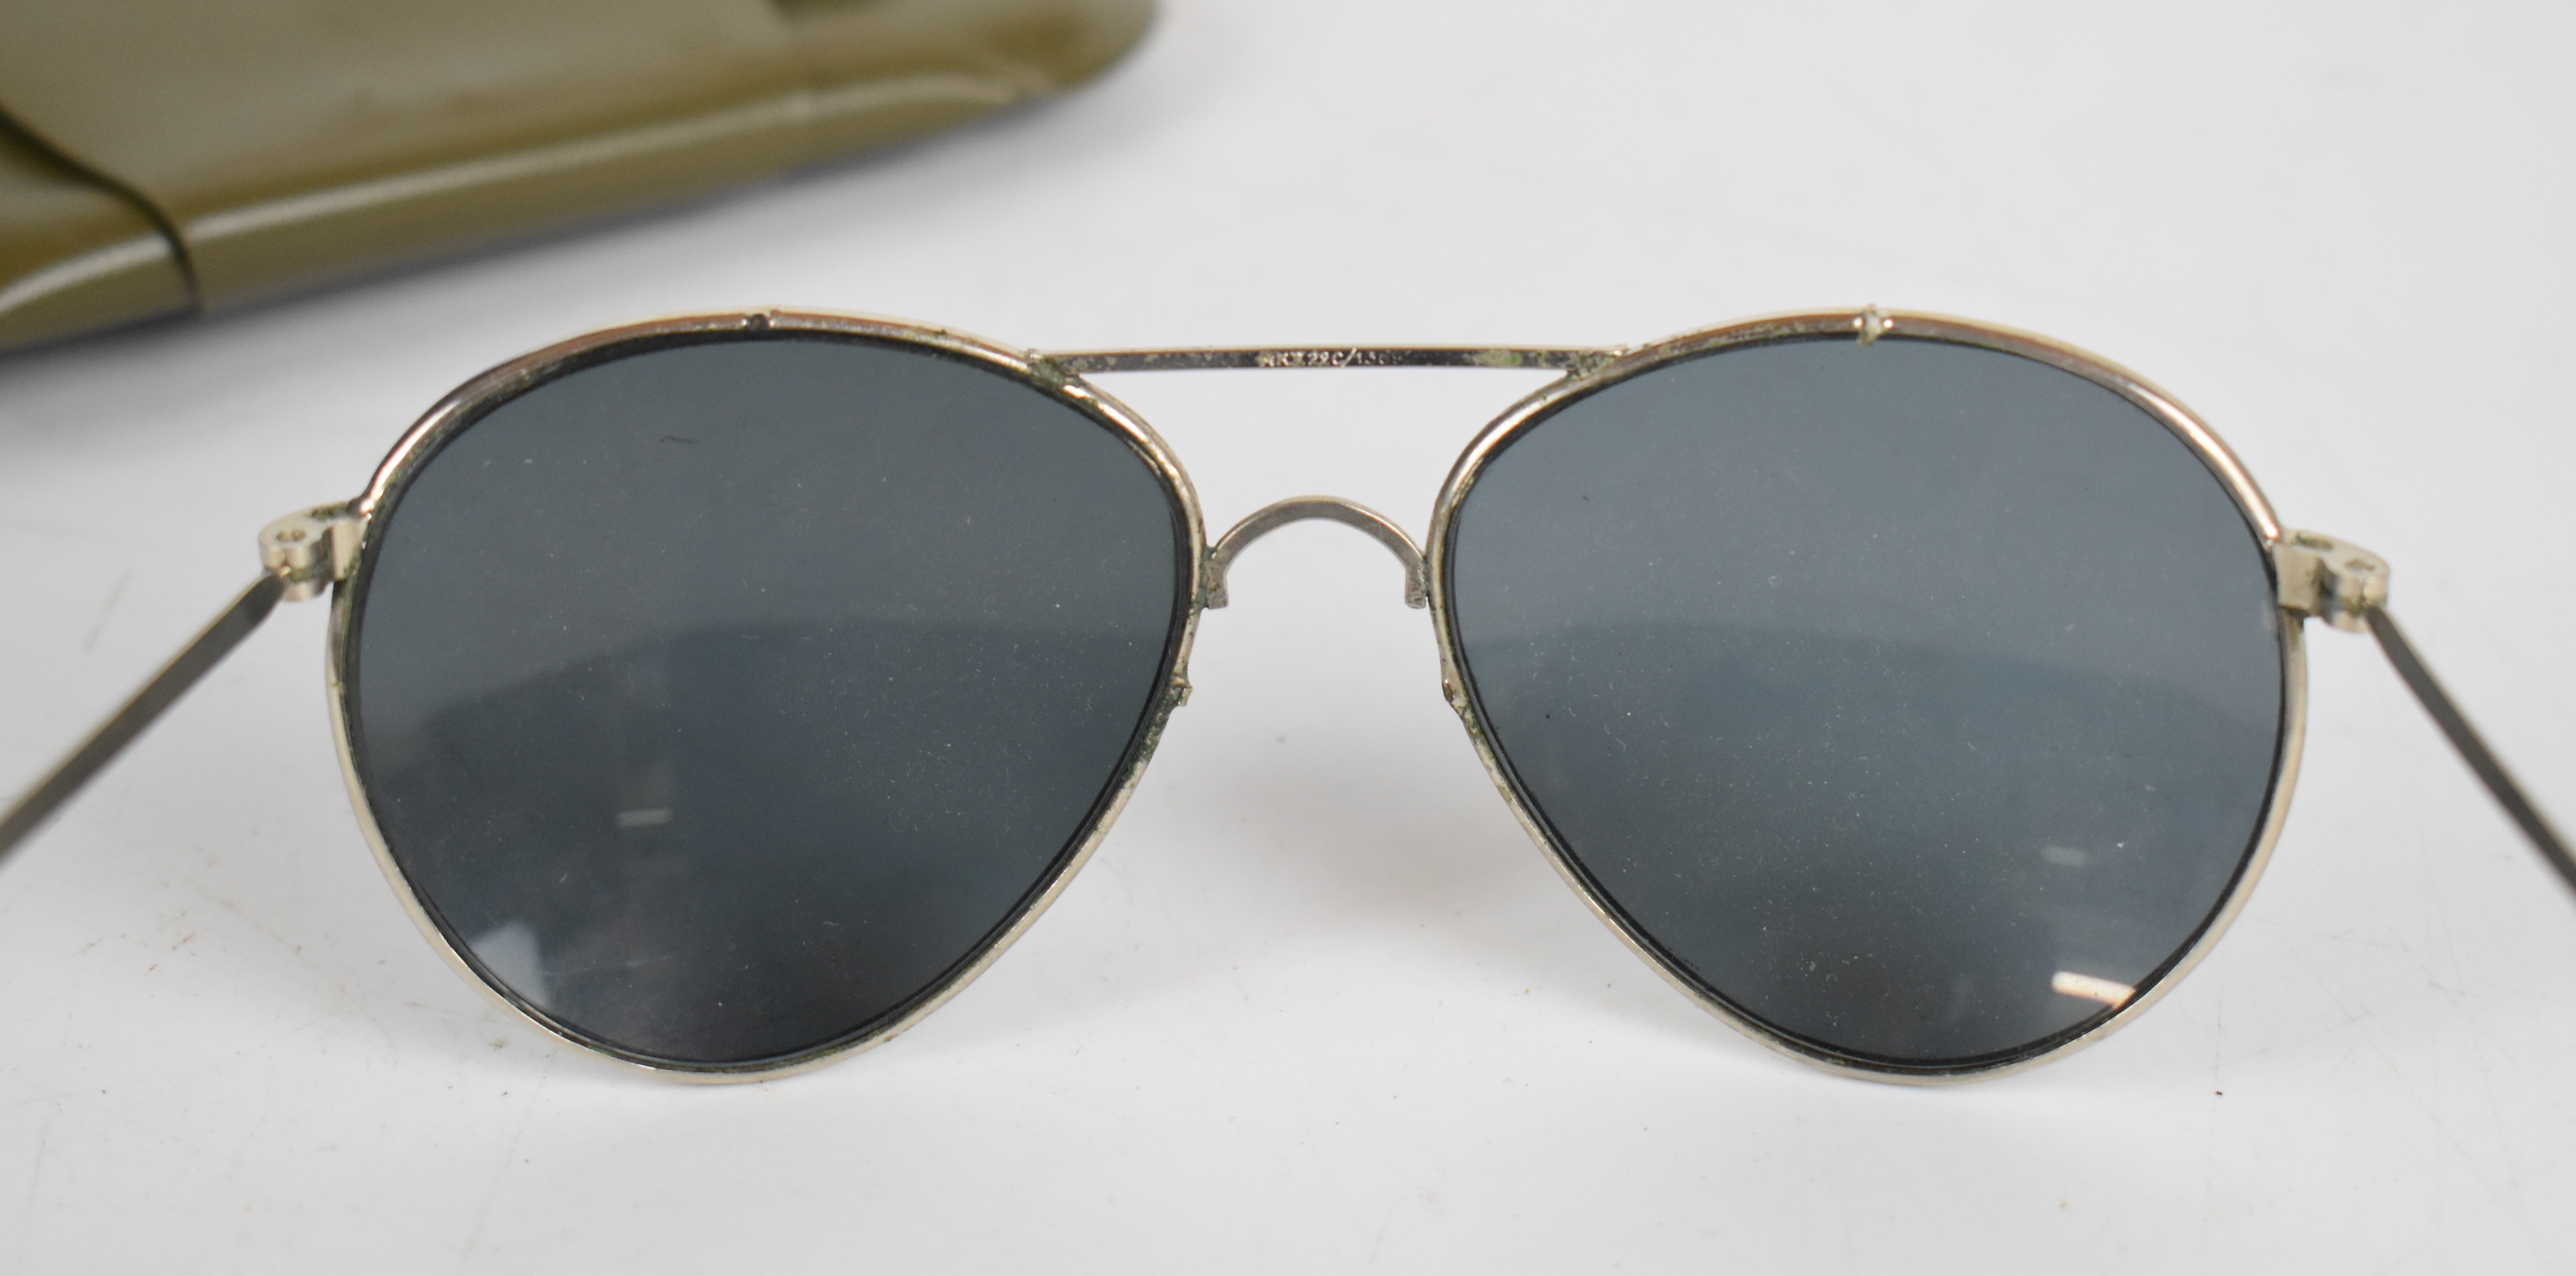 Two pairs of US military sunglasses, in original pouches, dated 1972